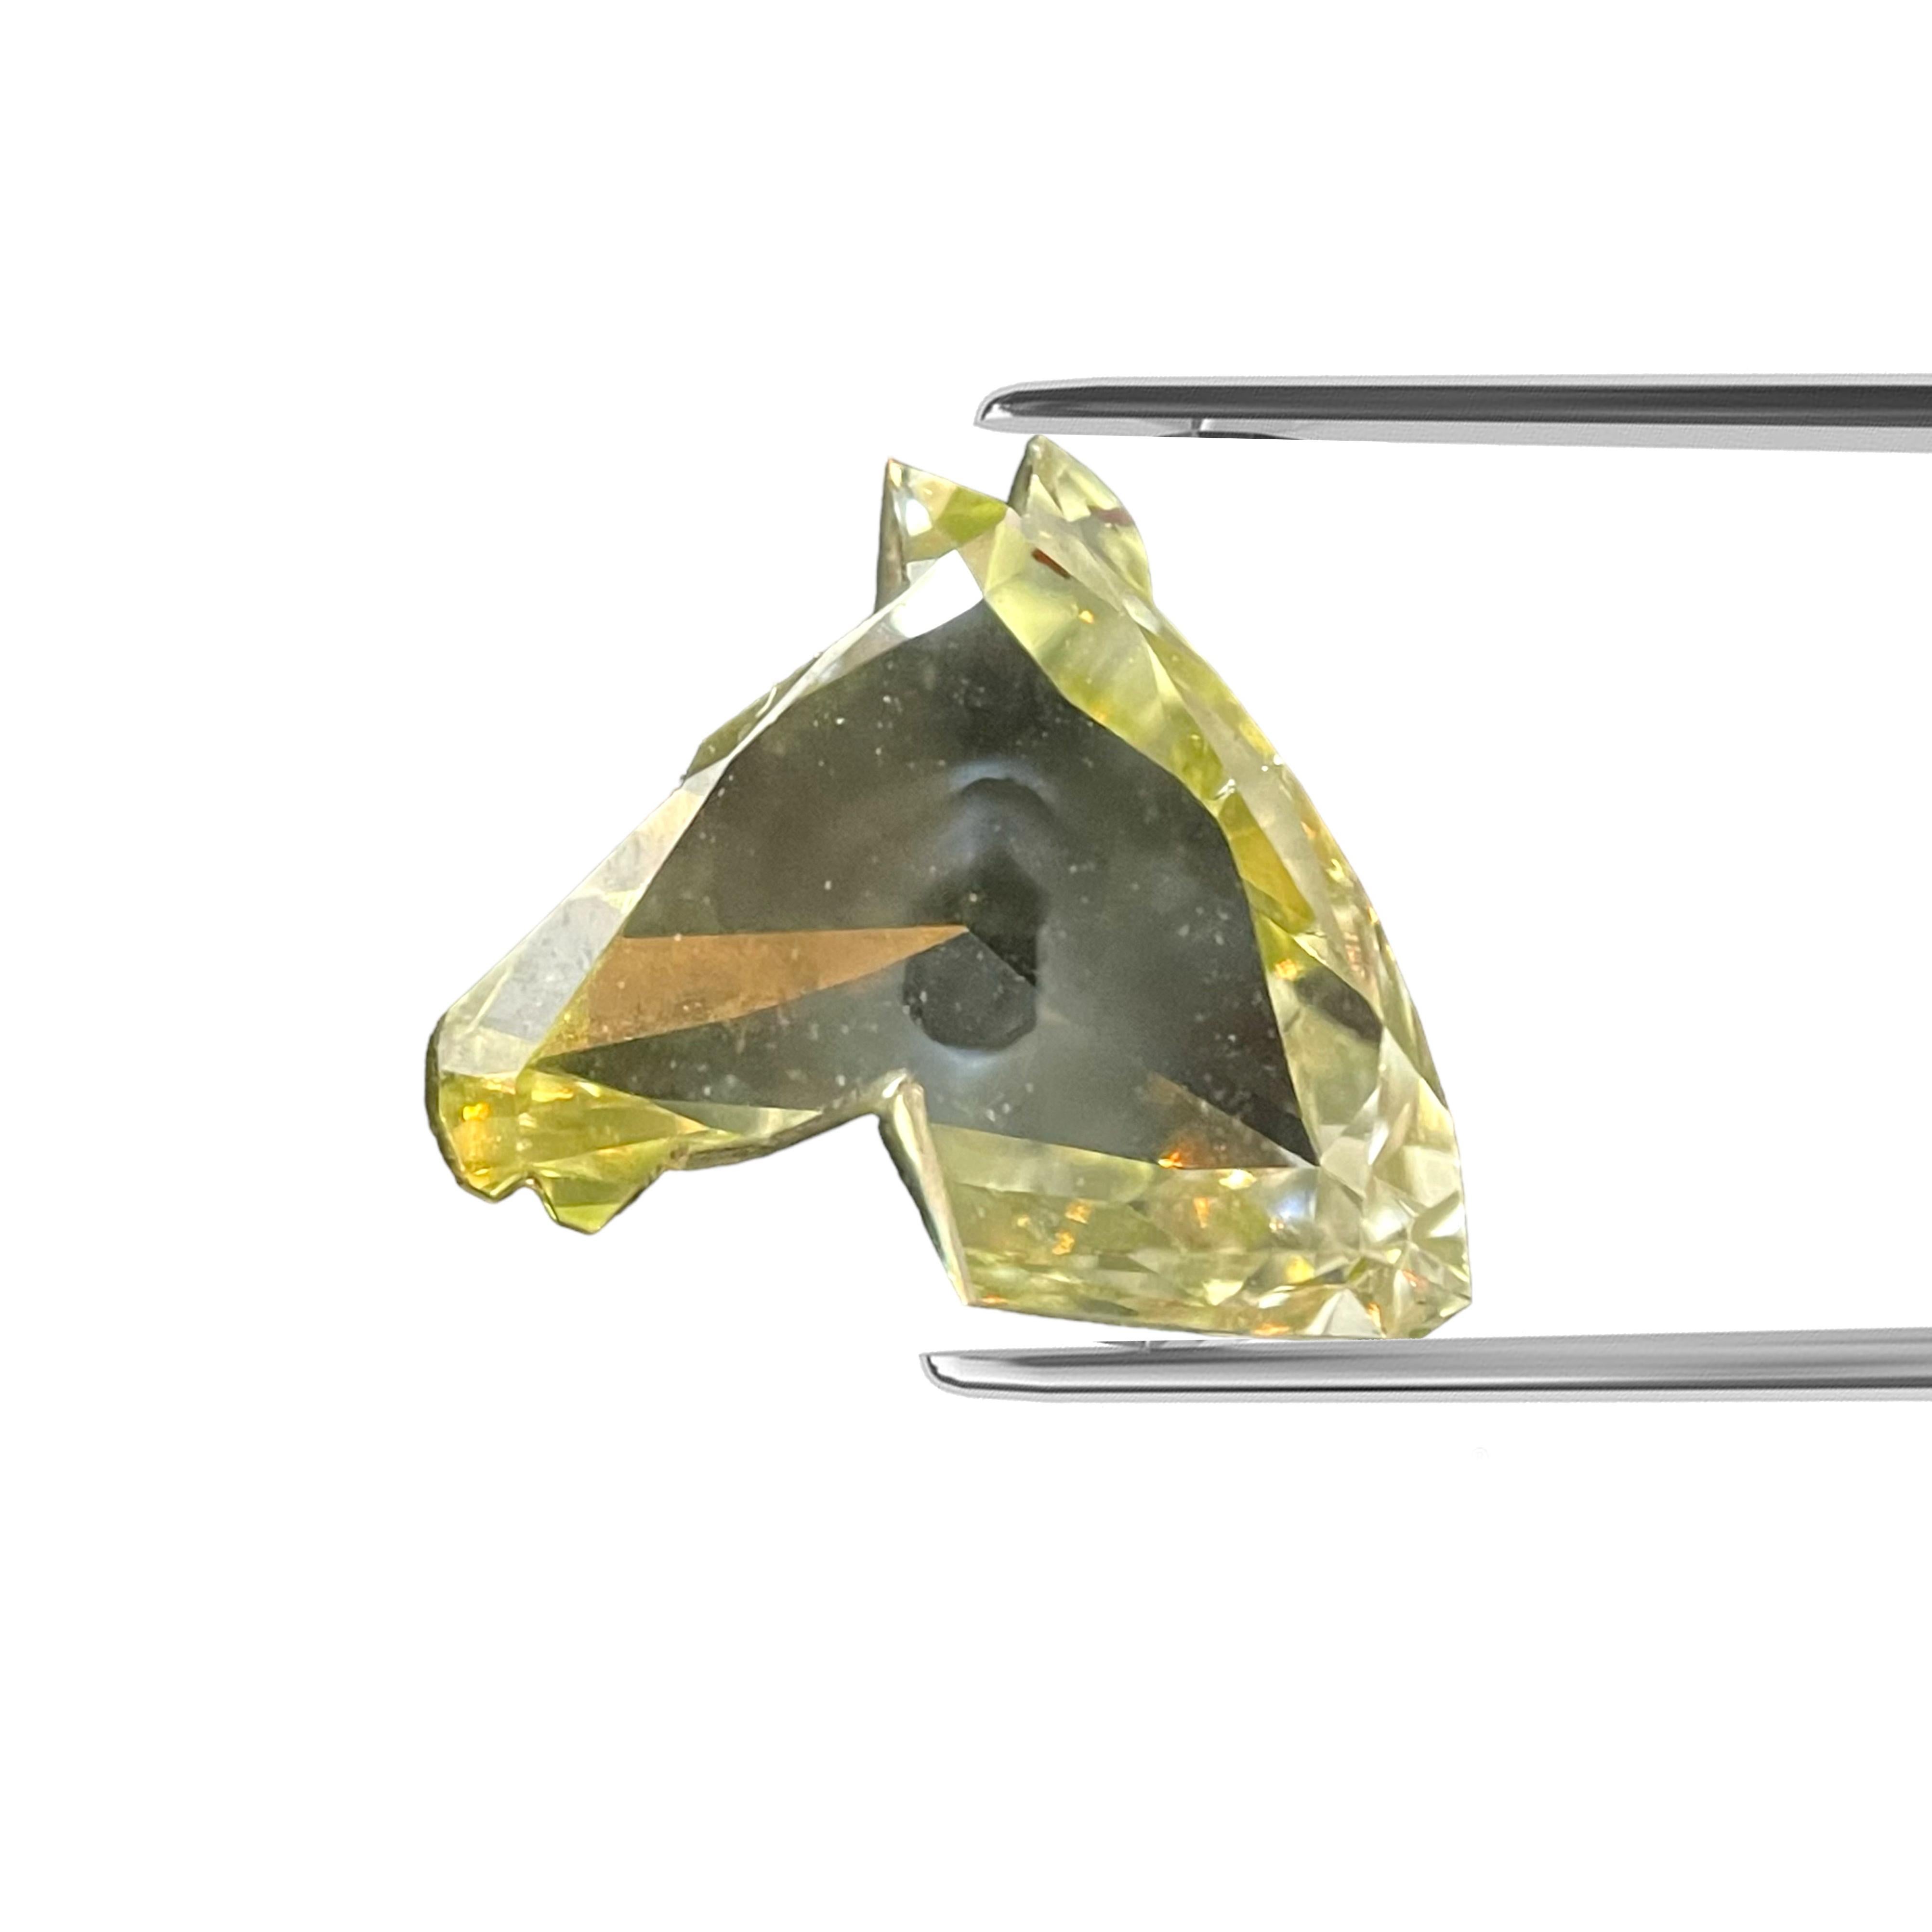 ITEM DESCRIPTION

ID #:	NYC55512
Stone Shape: HORSE MODIFIED BRILLIANT
Diamond Weight: 1.43ct
Clarity: SI2
Color: Fancy Brownish Greenish Yellow 
Cut:	Excellent
Measurements: 8.65 x 7.20 x 2.99 mm
Symmetry: Not Applicable
Polish: Very